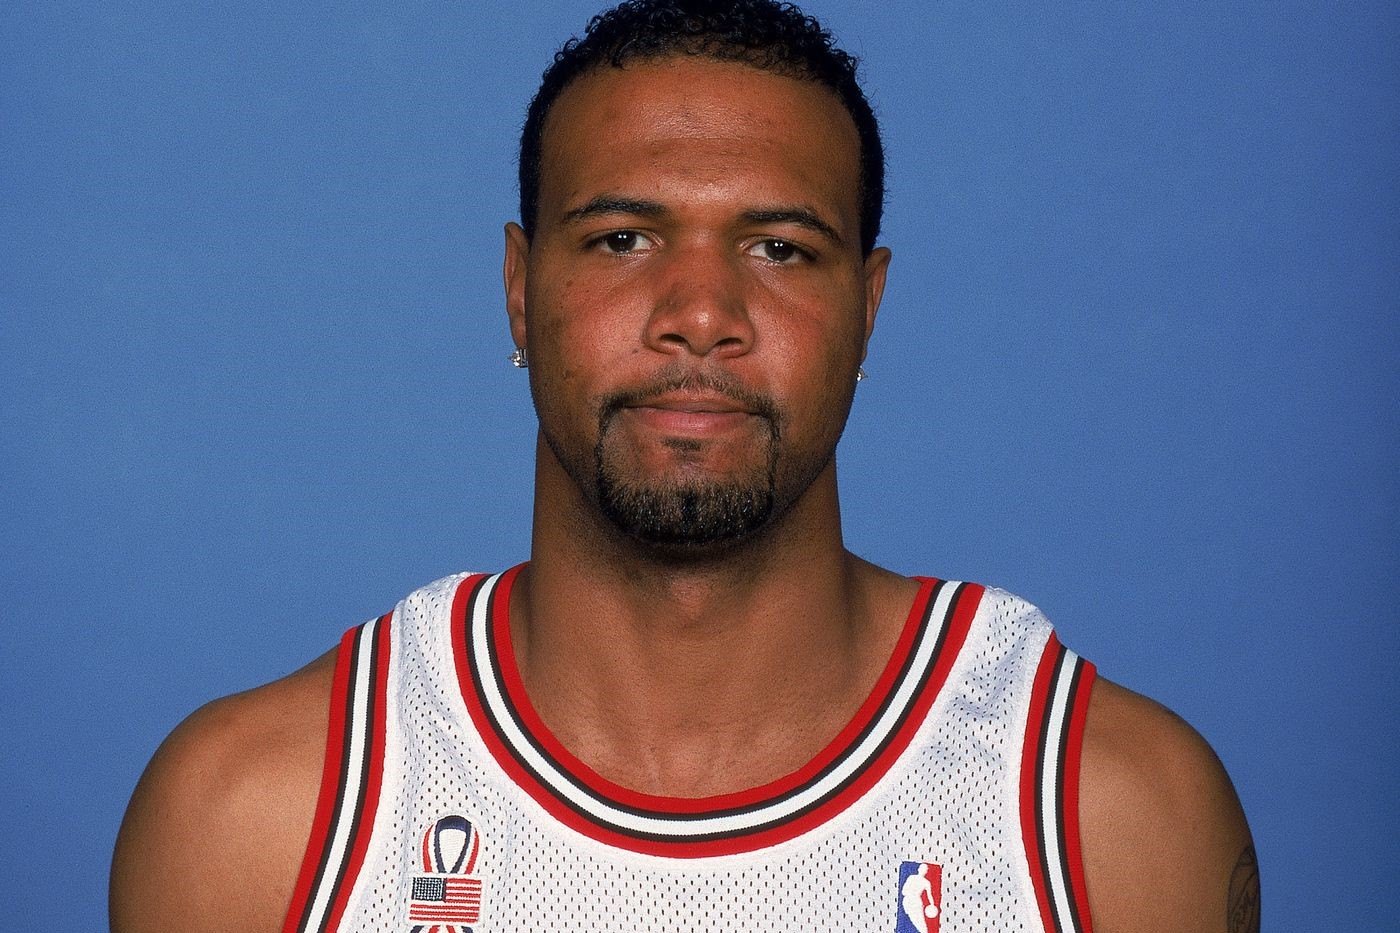 Gf Sues Ex NBA Star Ron Mercer For Range Rover Court Sides With Player